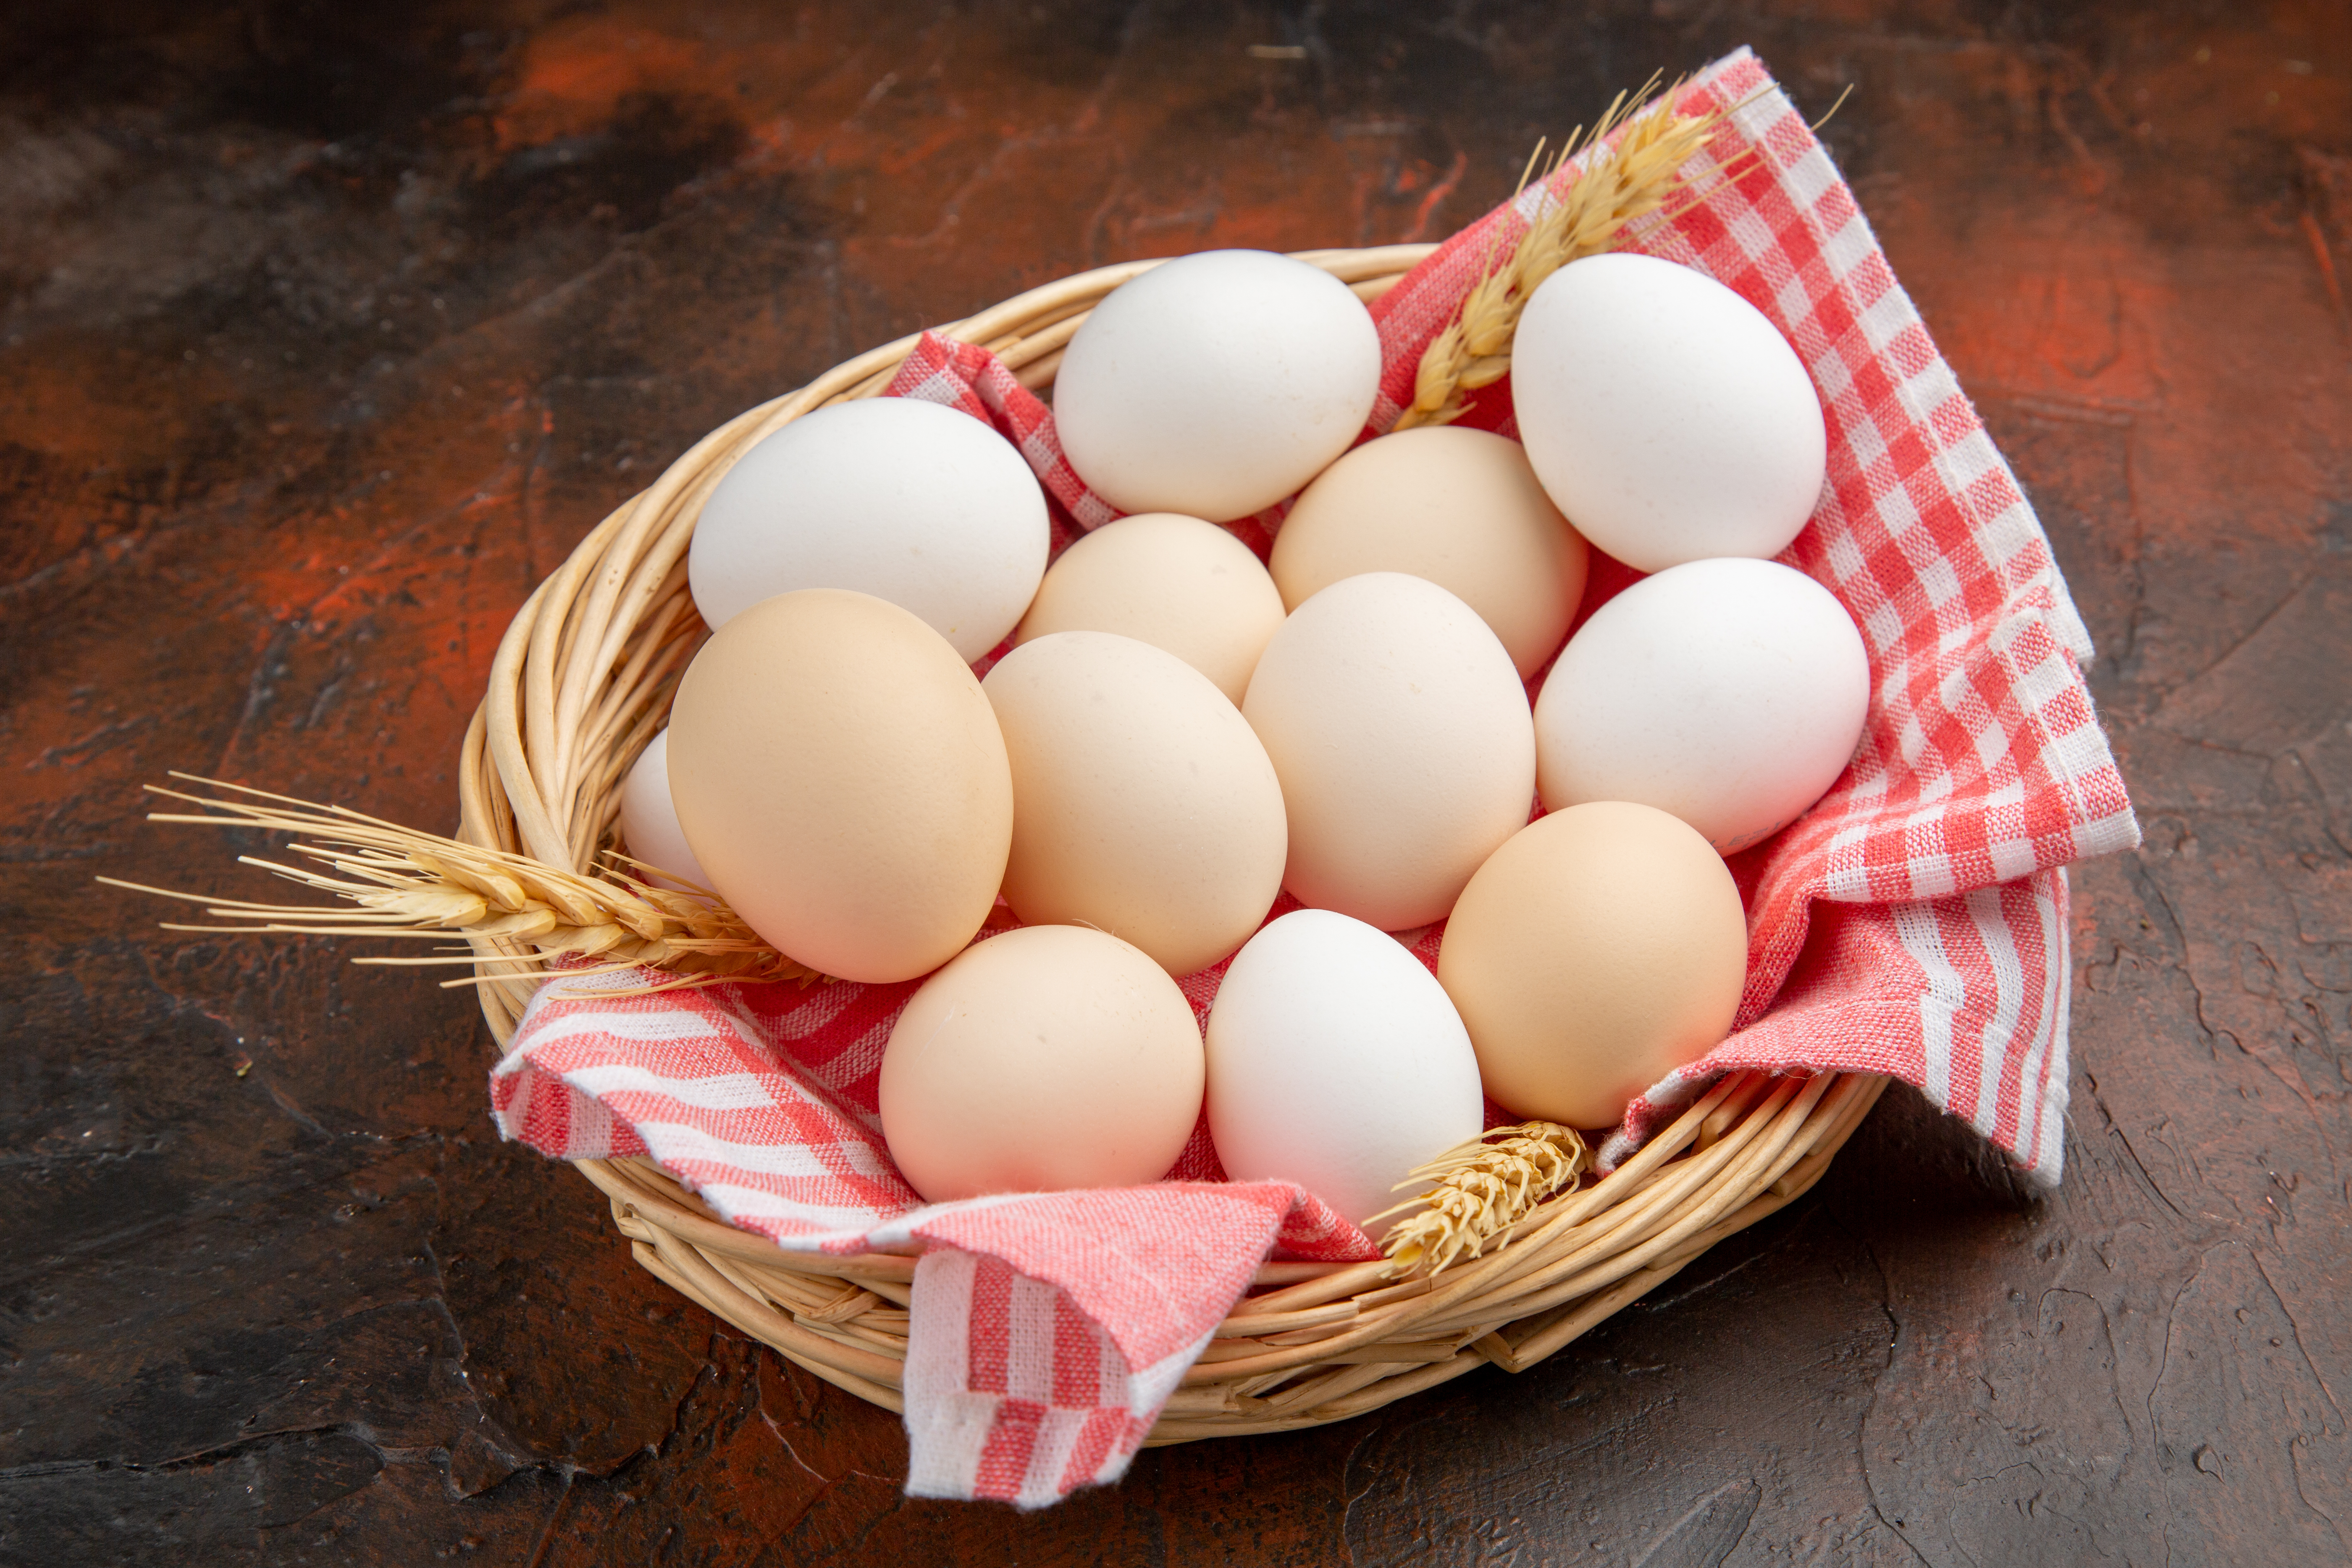 front-view-white-chicken-eggs-inside-basket-with-towel-dark-surface